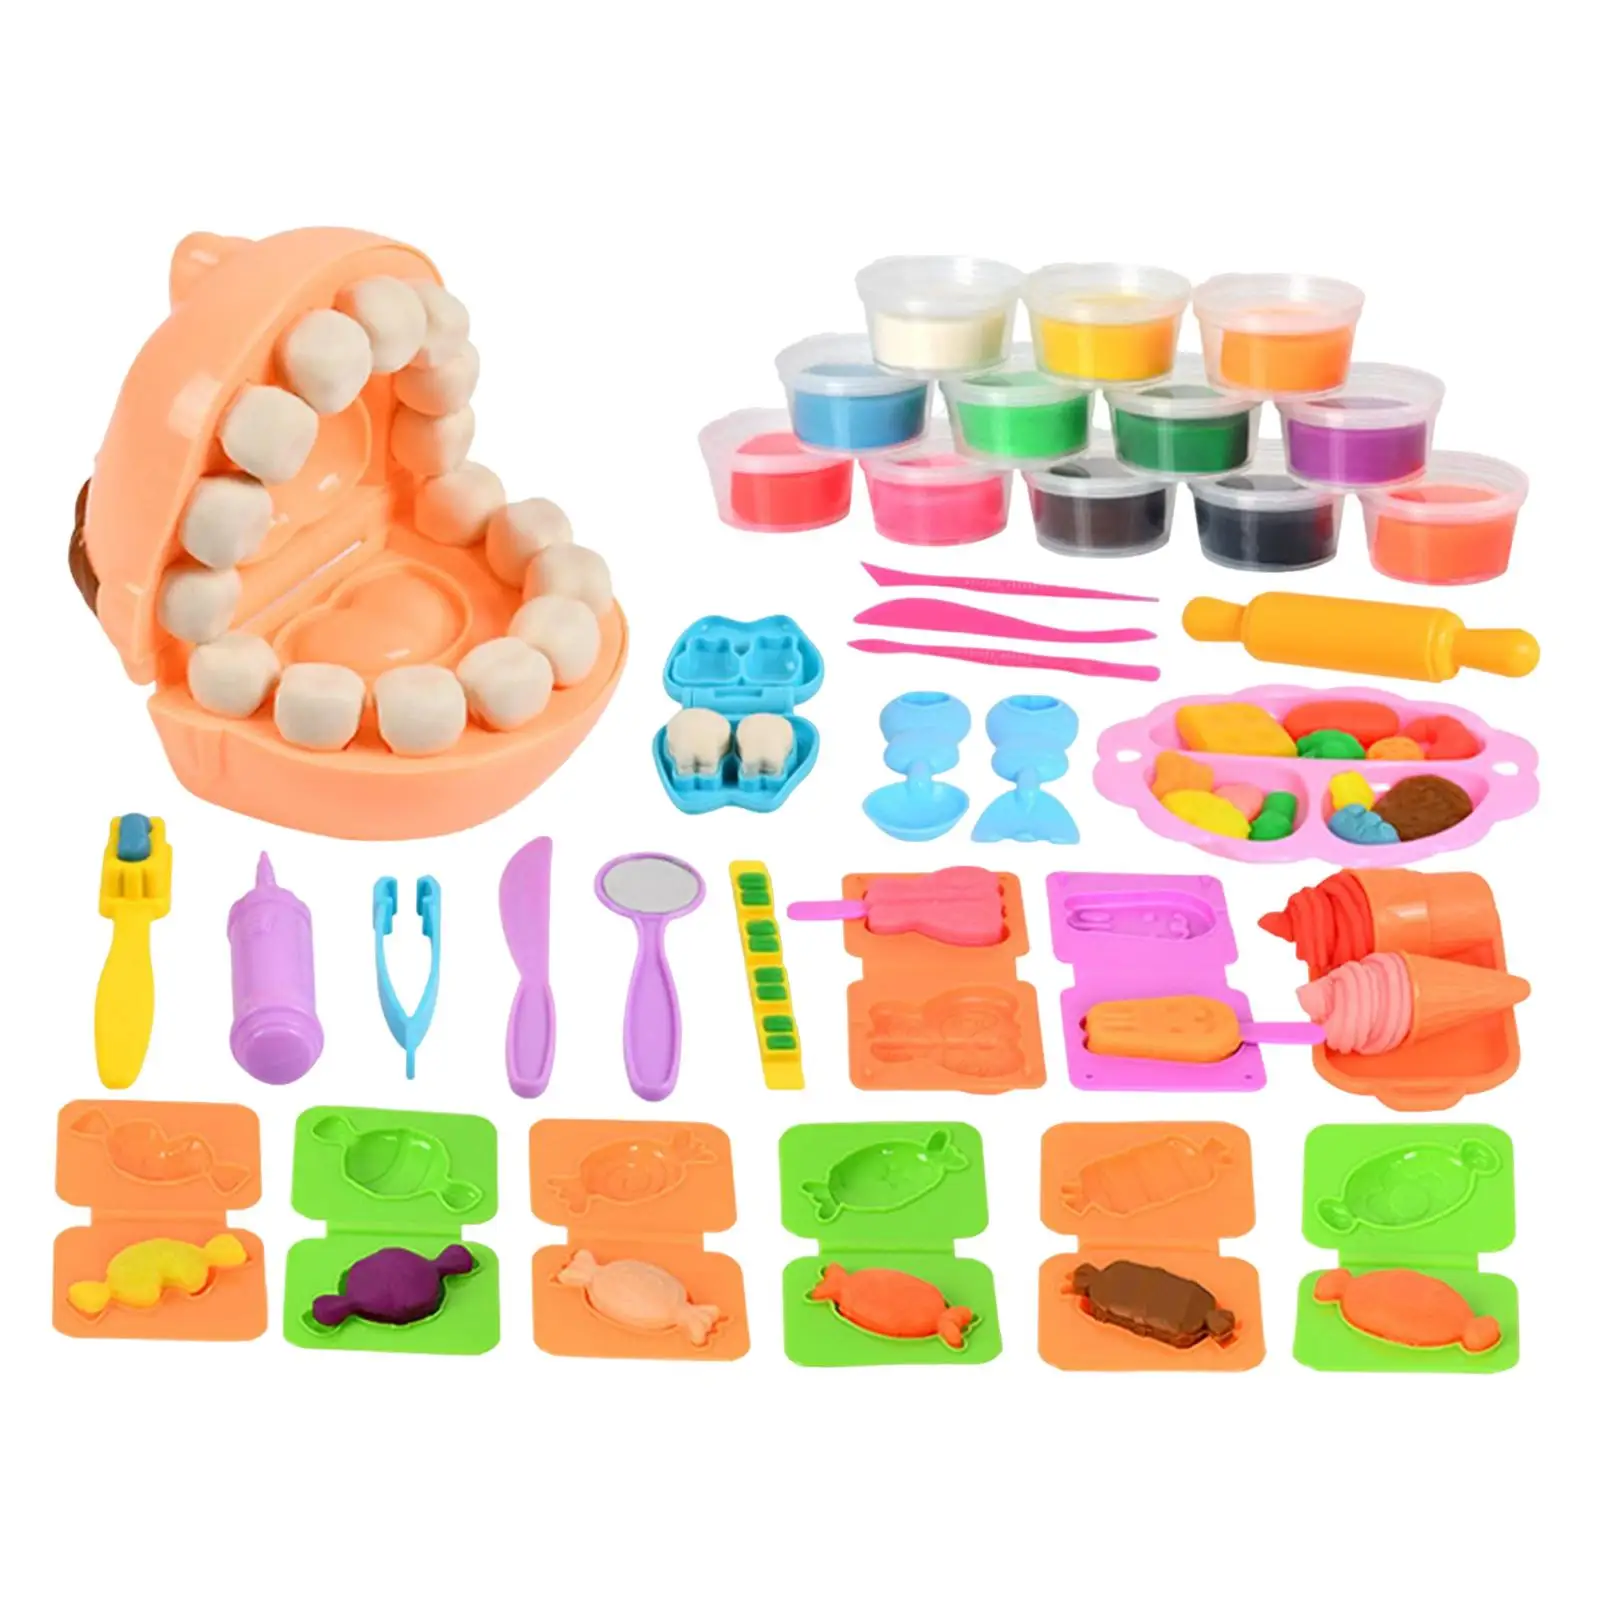 Modeling Clay Set with Accessoires 12 Colors DIY Models Educational Color Play Set for Children Boys Birthday Girl Kids